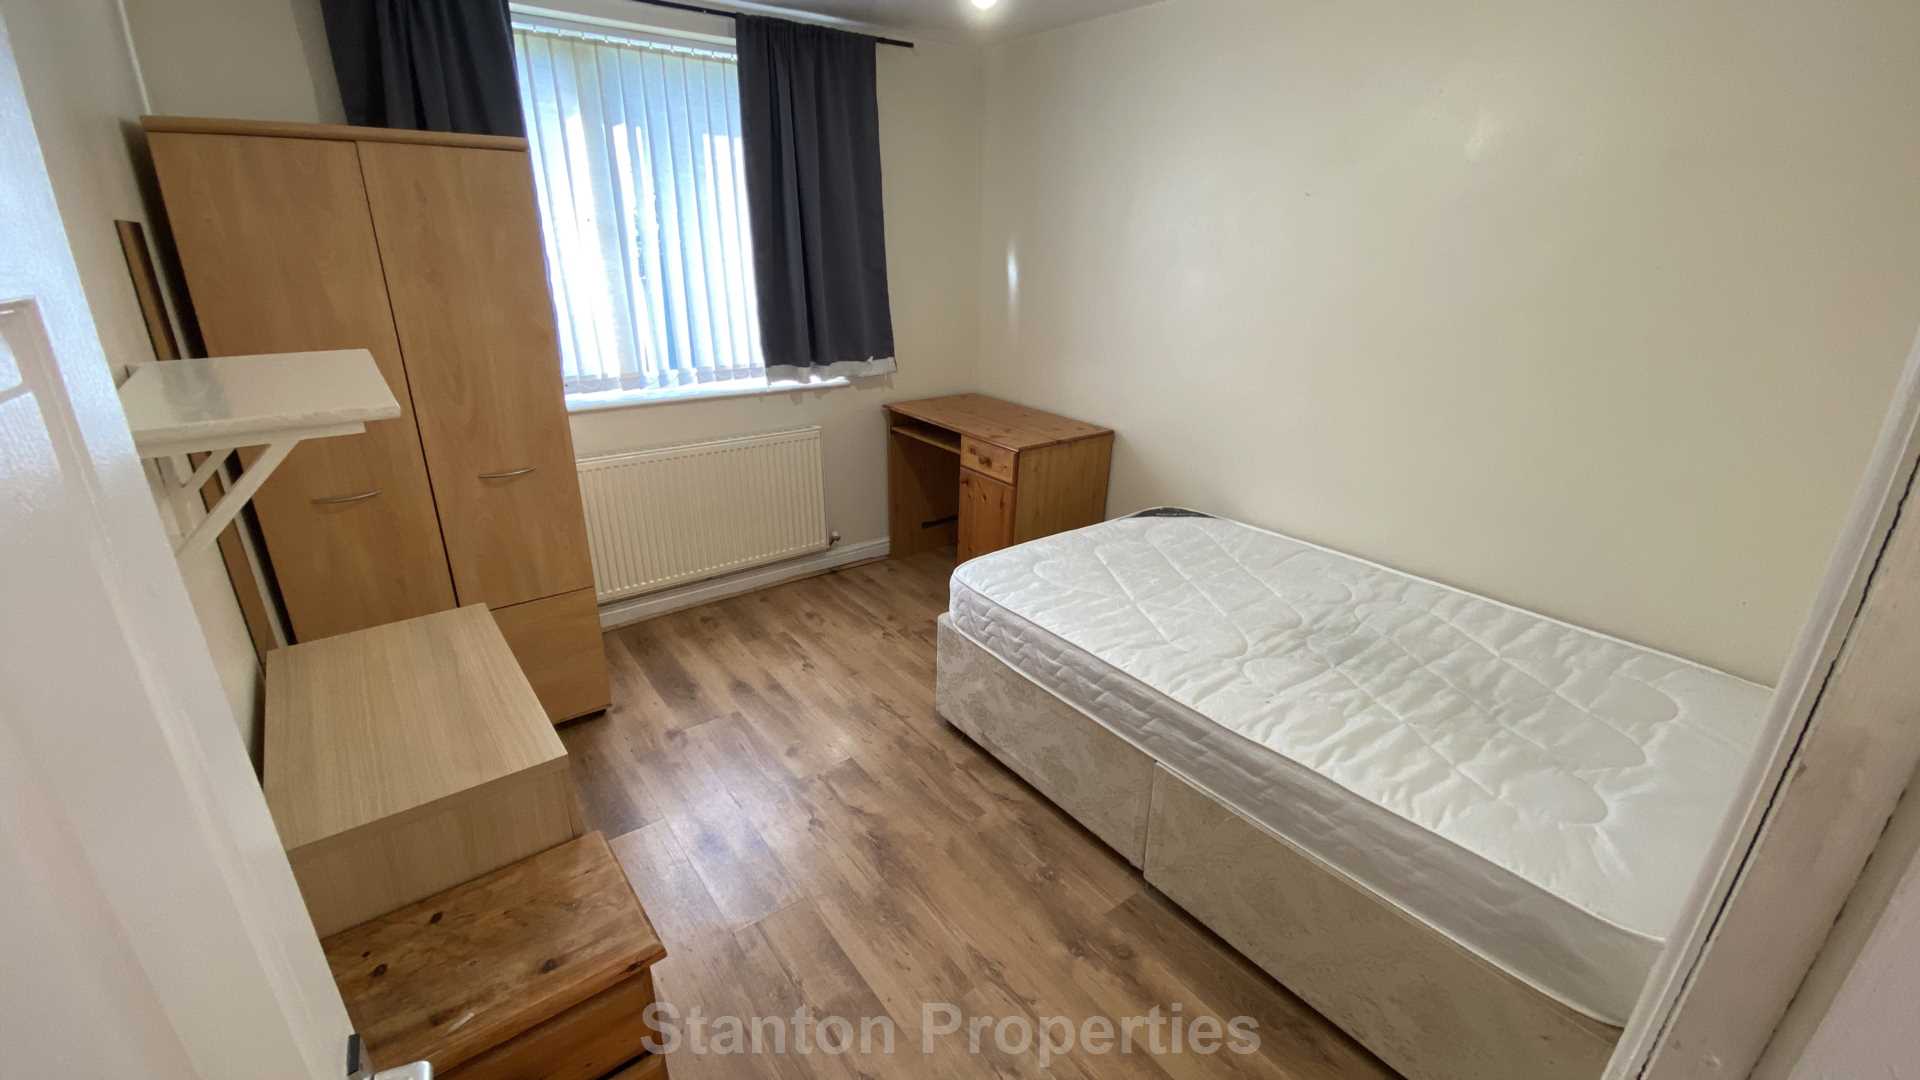 SEE VIDEO TOUR, £115 pppw excluding bills, Mauldeth Road, Withington, Image 9